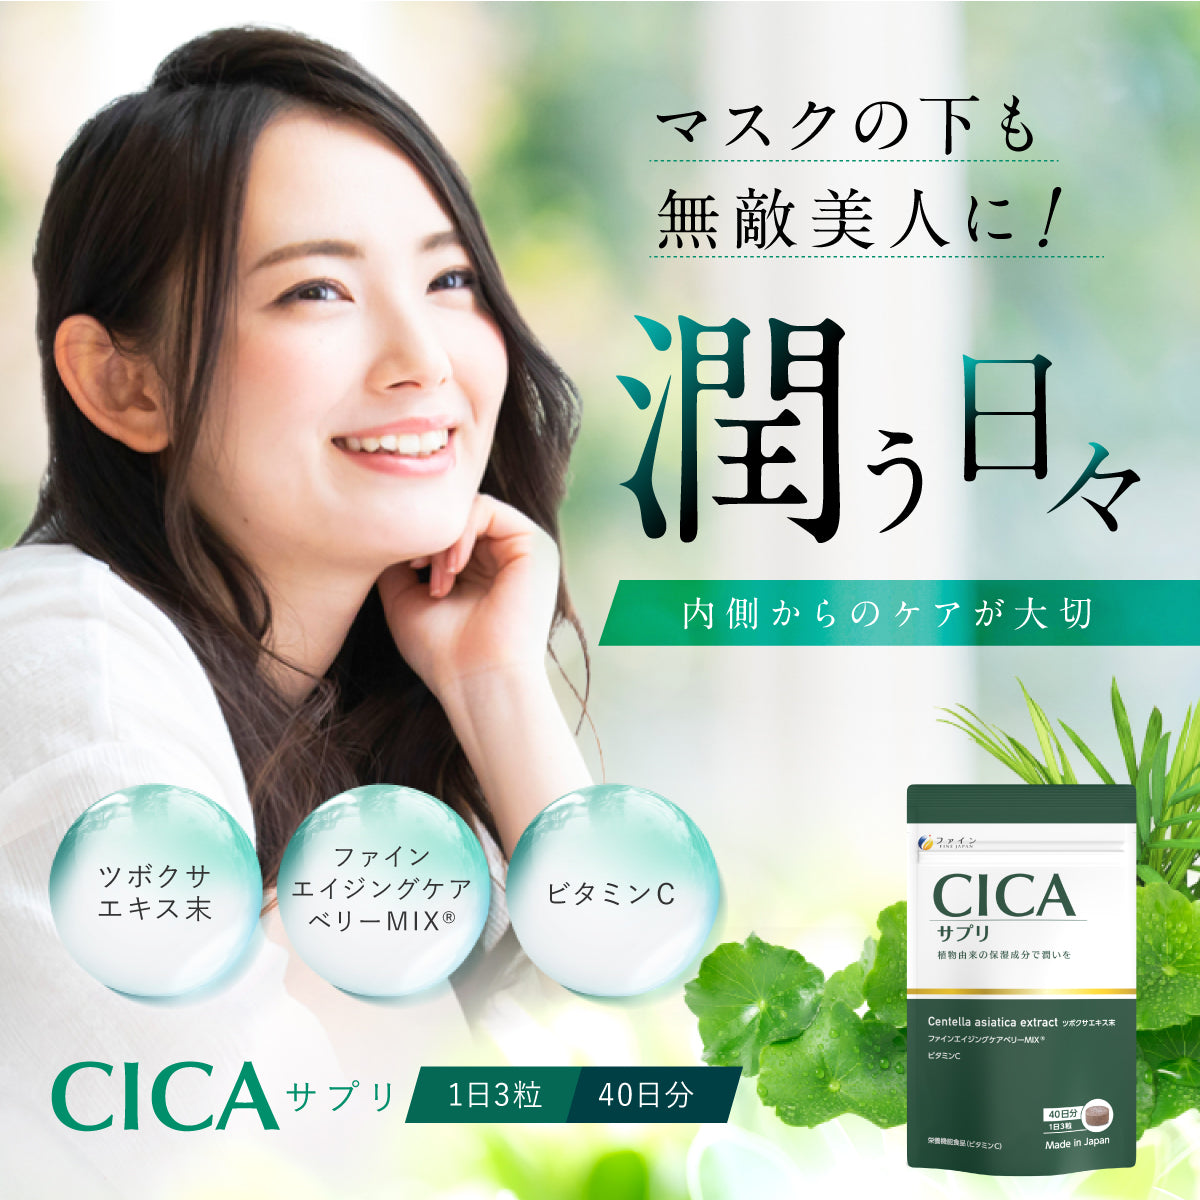 CICA (120 Tablets x 2 Packs) by FINE JAPAN